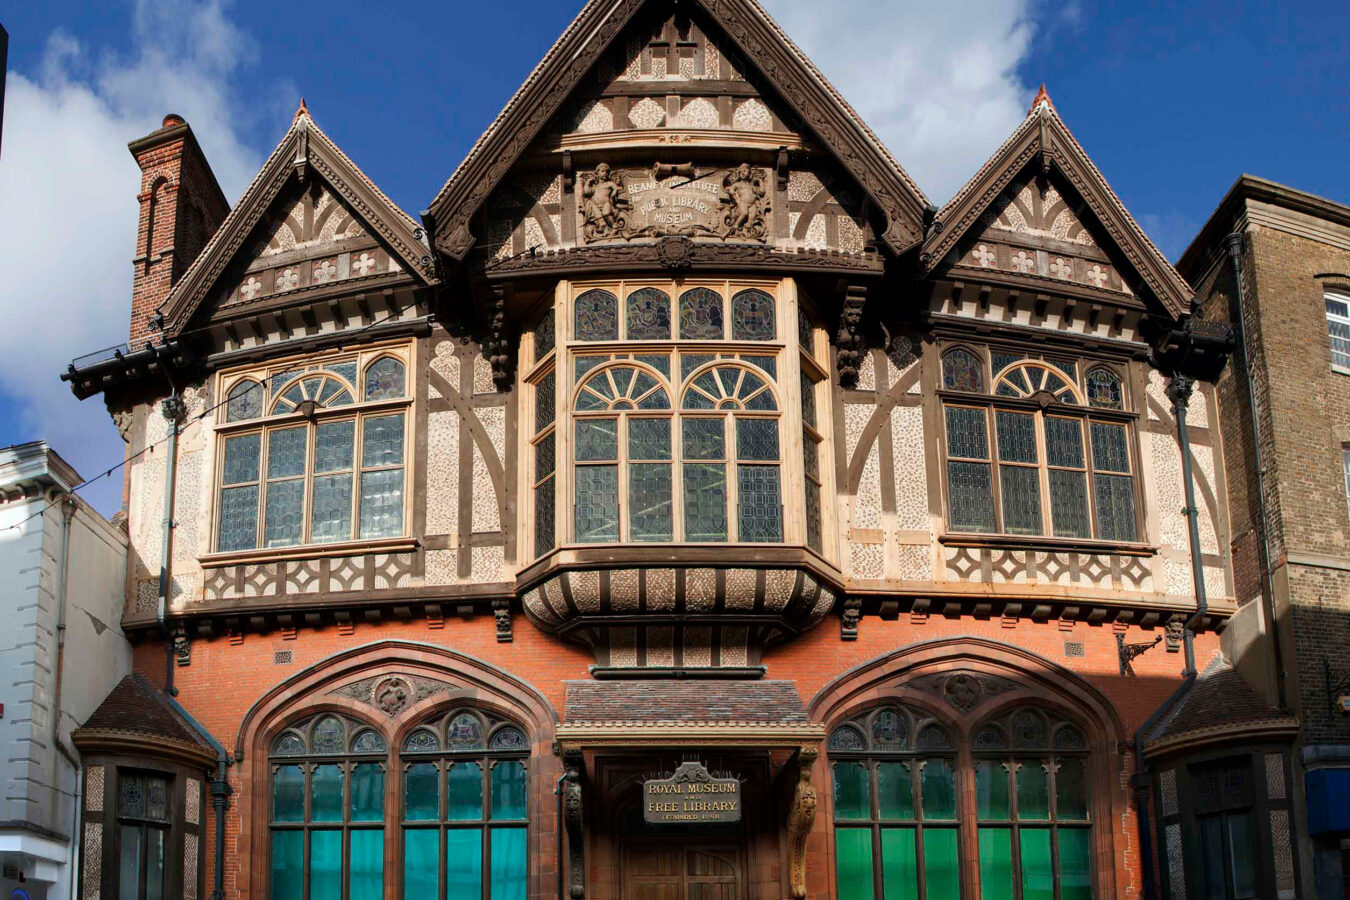 the facade of a grand tudor style building with large arched windows, decorative woodwork and three triangular roofs.